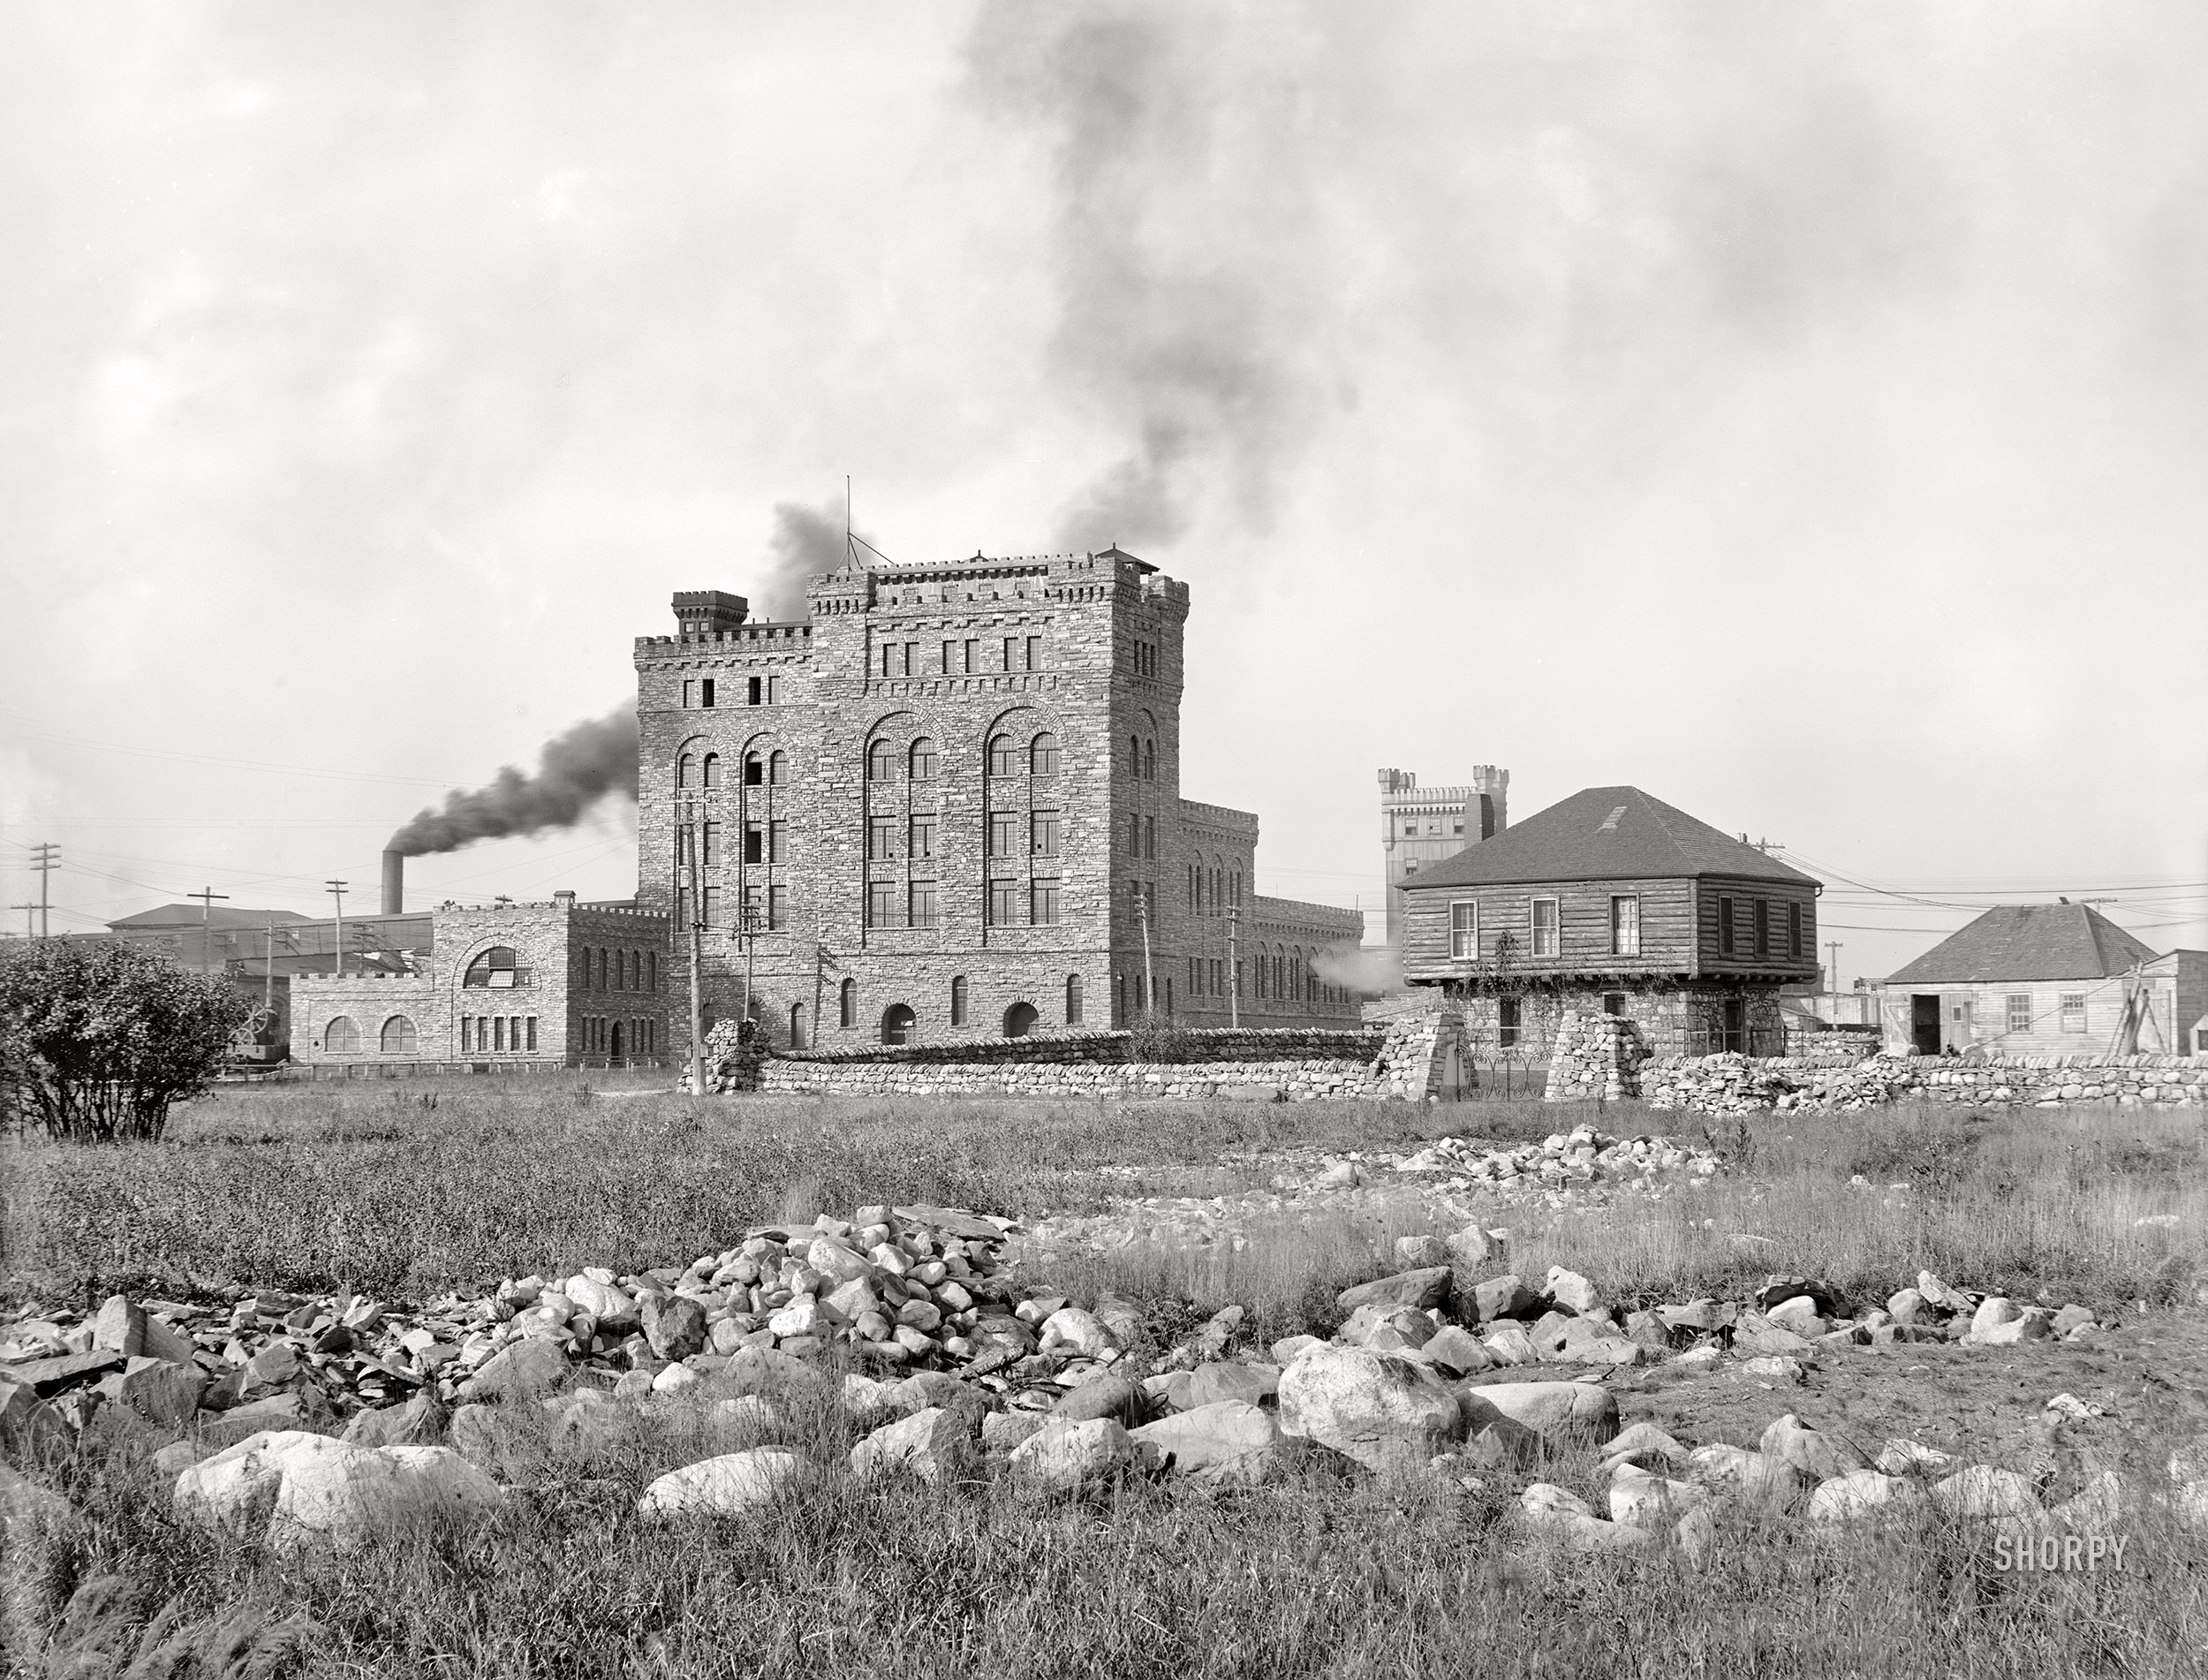 Circa 1902. "Sulphite paper mill and old blockhouse. Sault Ste. Marie, Ontario." 8x10 inch dry plate glass negative, Detroit Photographic Company. View full size.